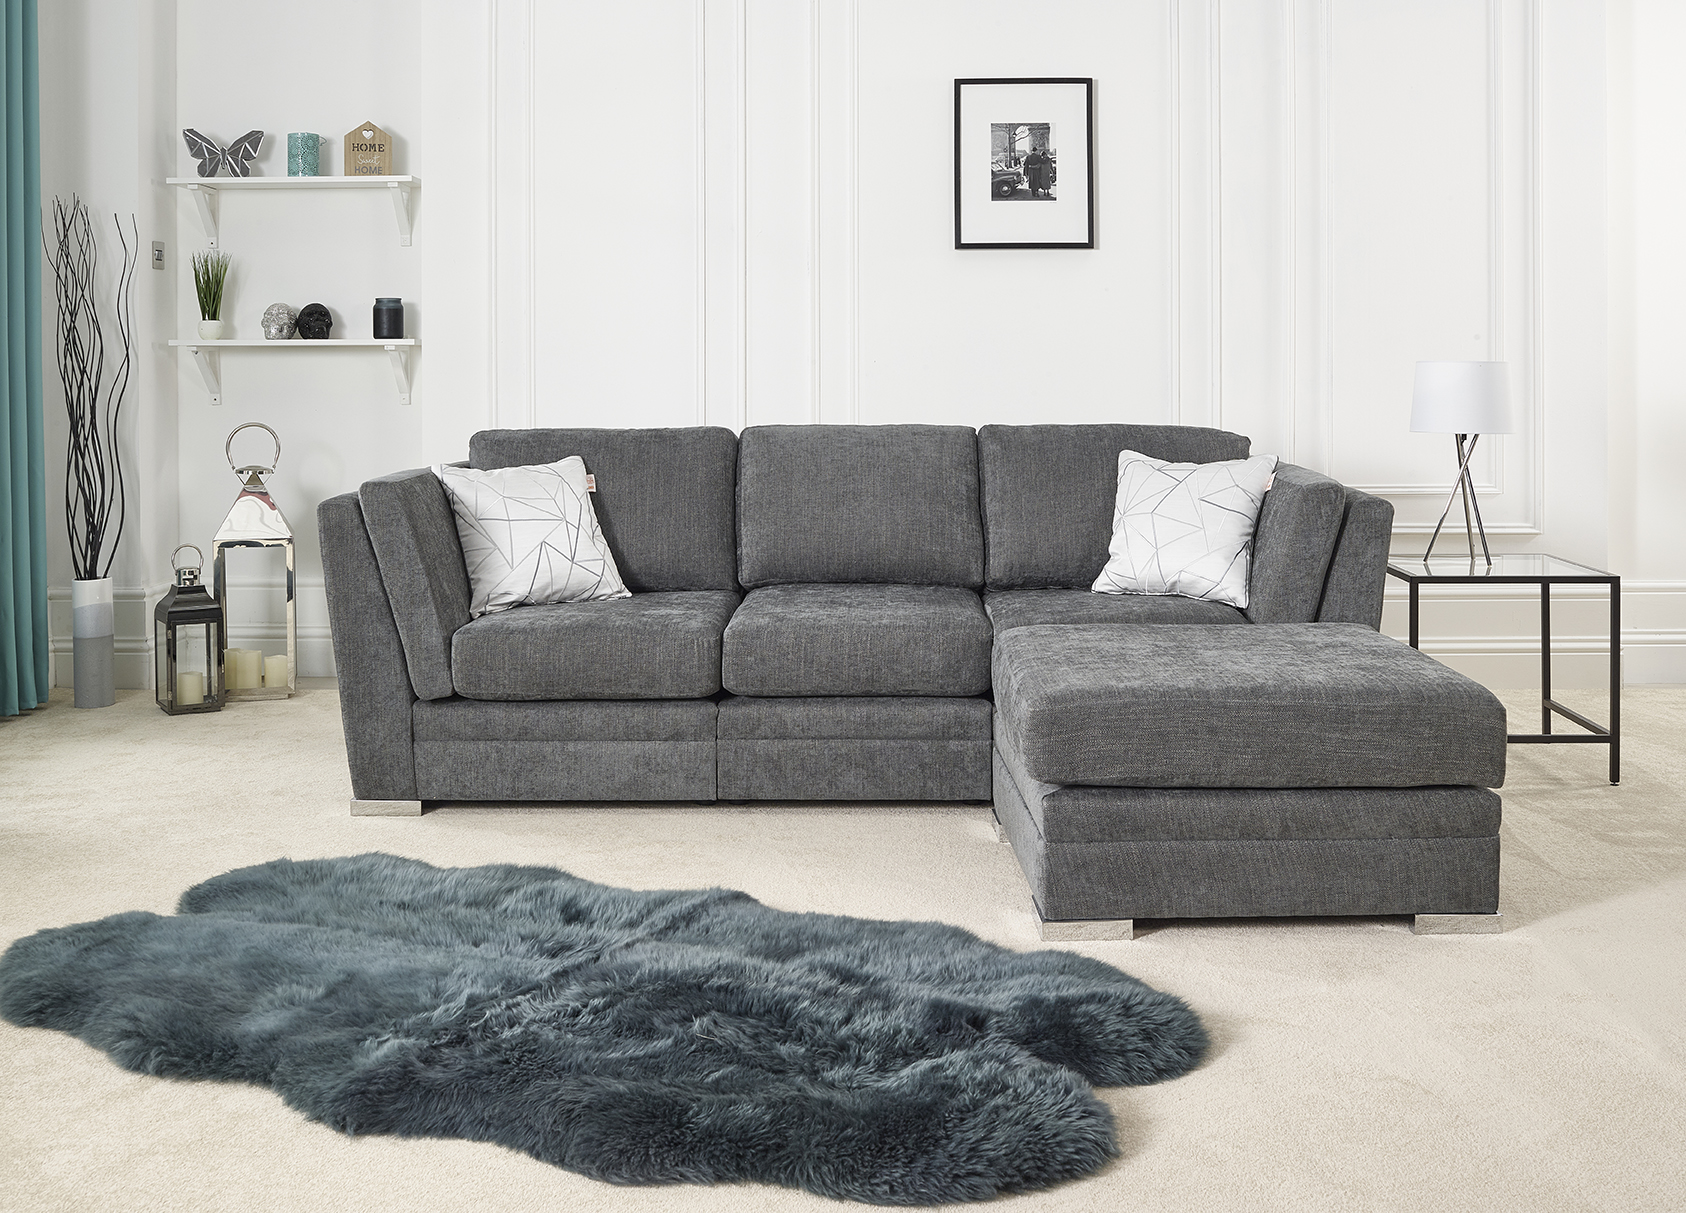 Havoc Play sports Coordinate California 3 Seater Sofa with Footstool - Pay Weekly Carpets